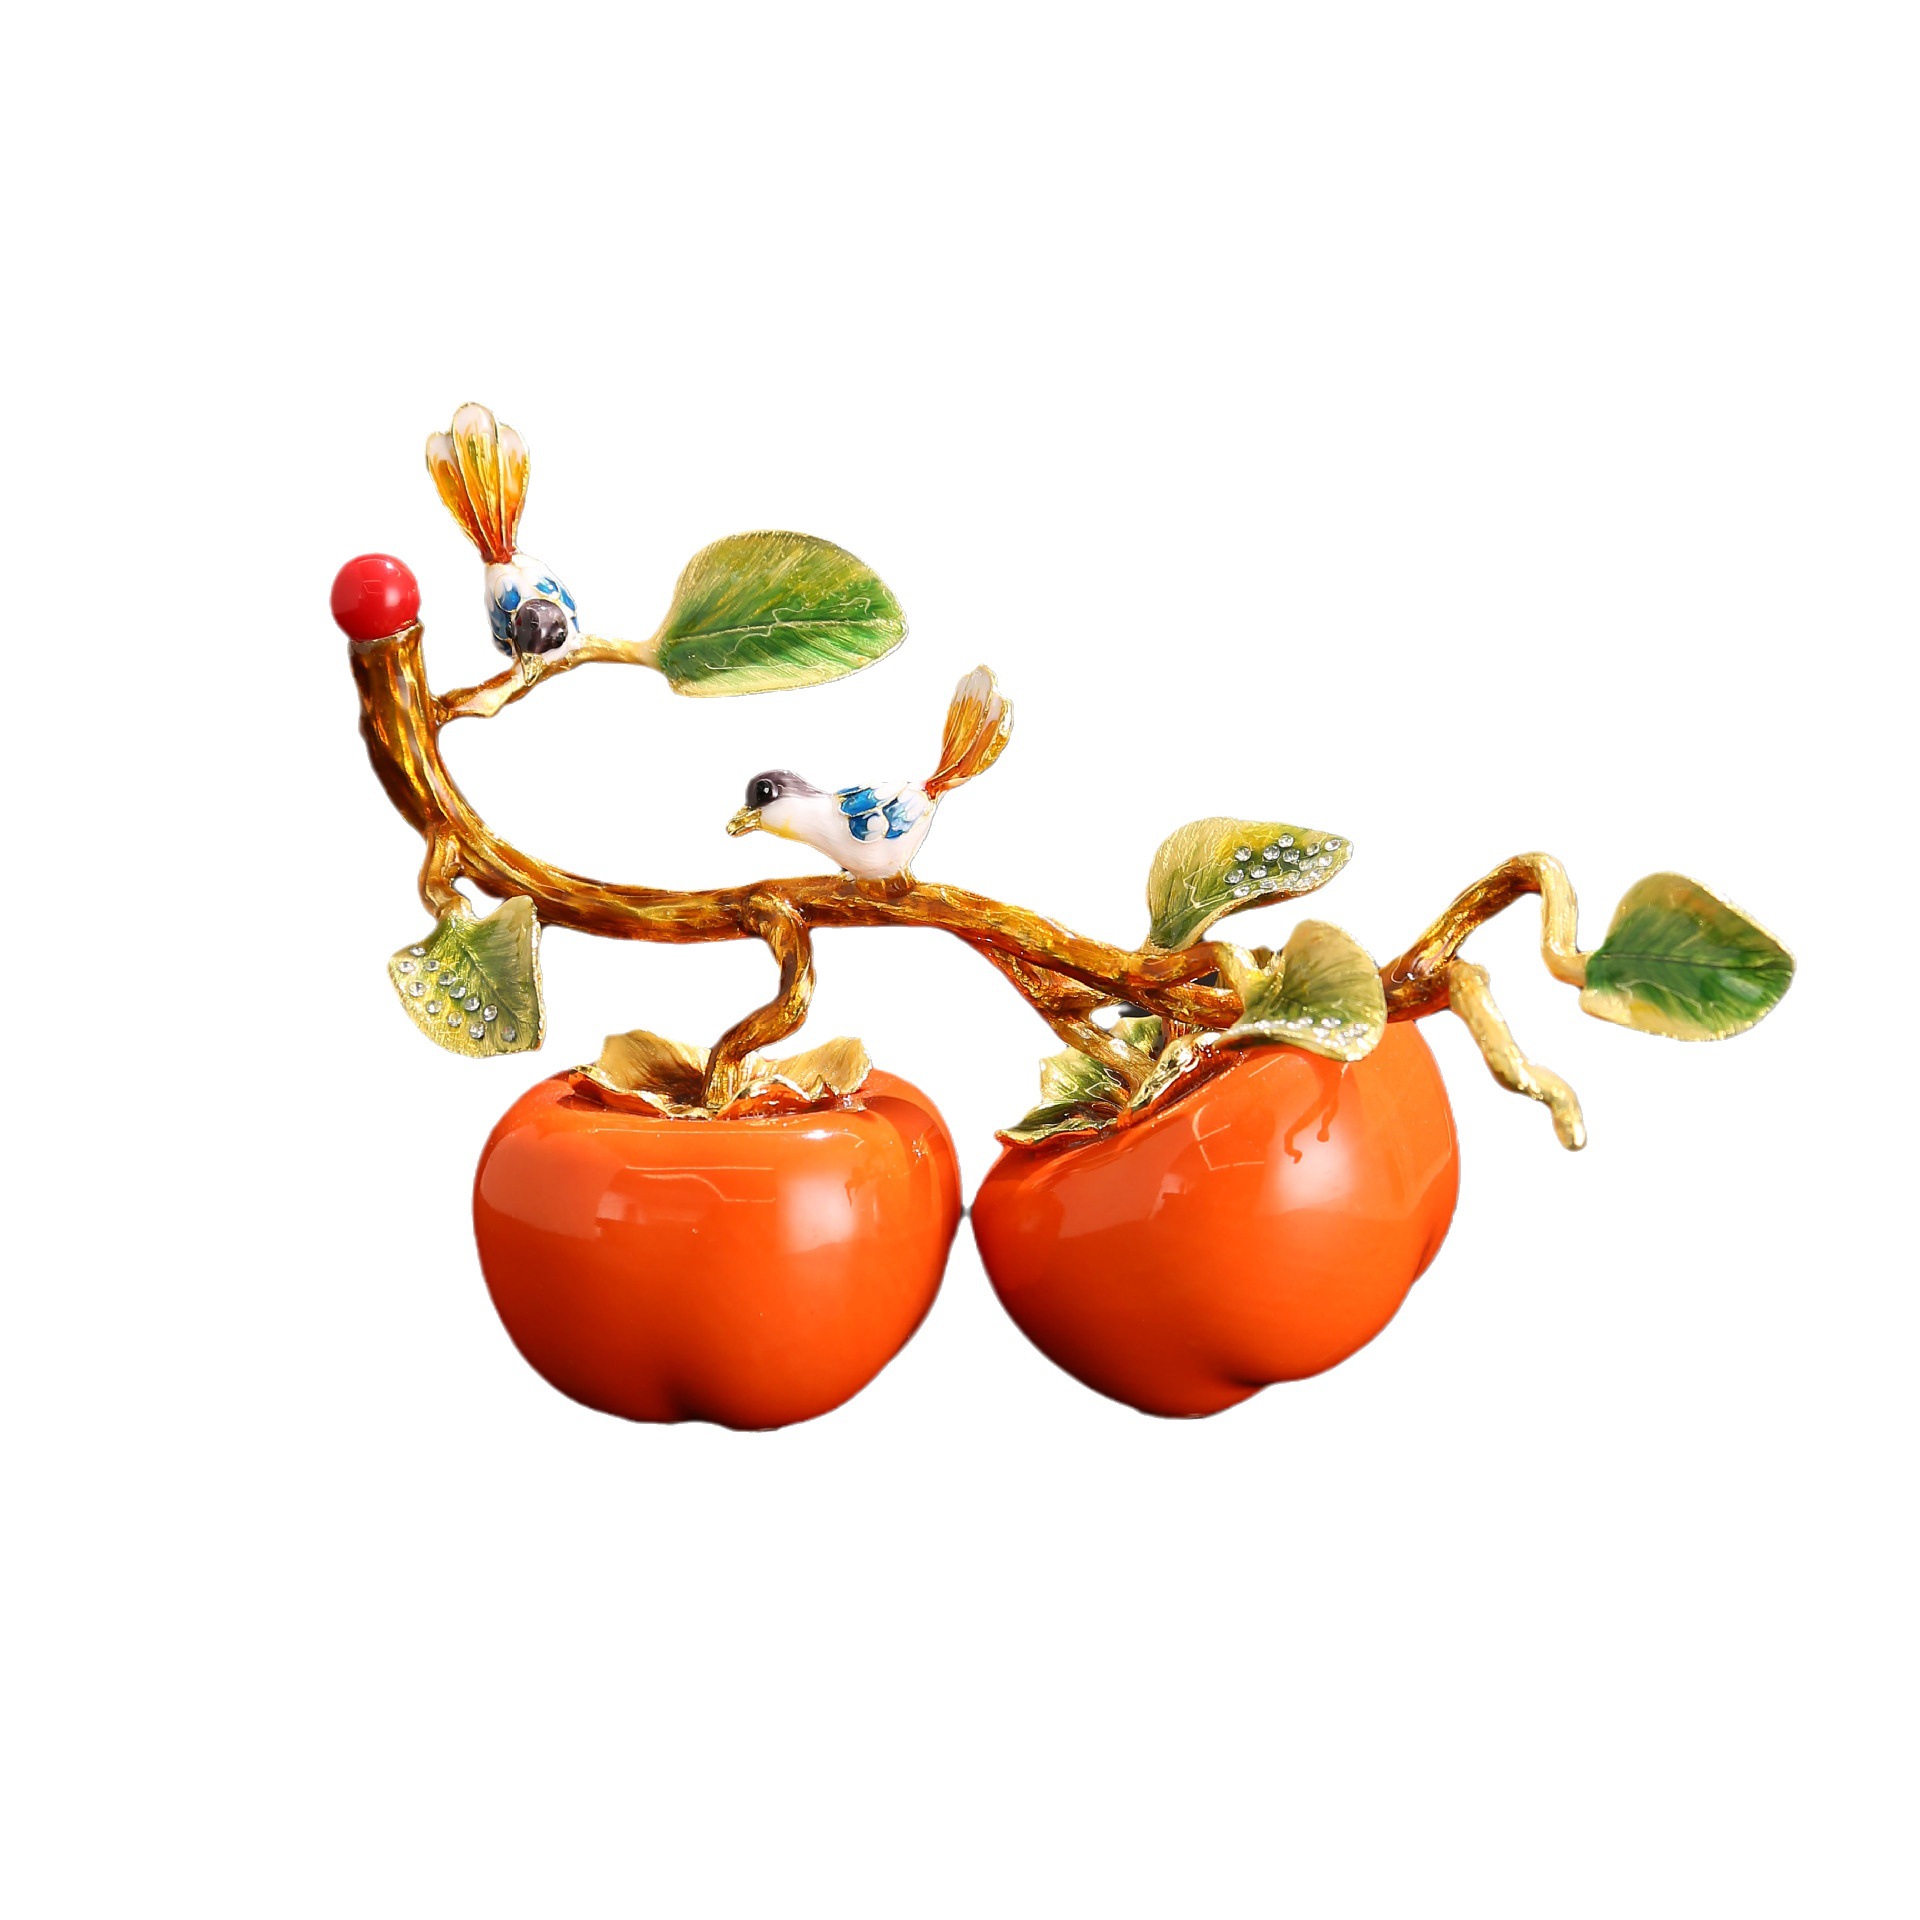 New Chinese Enamel Persimmon Persimmon All the Best Decoration TV Cabinet Entrance Villa Decoration Home New Home Gift